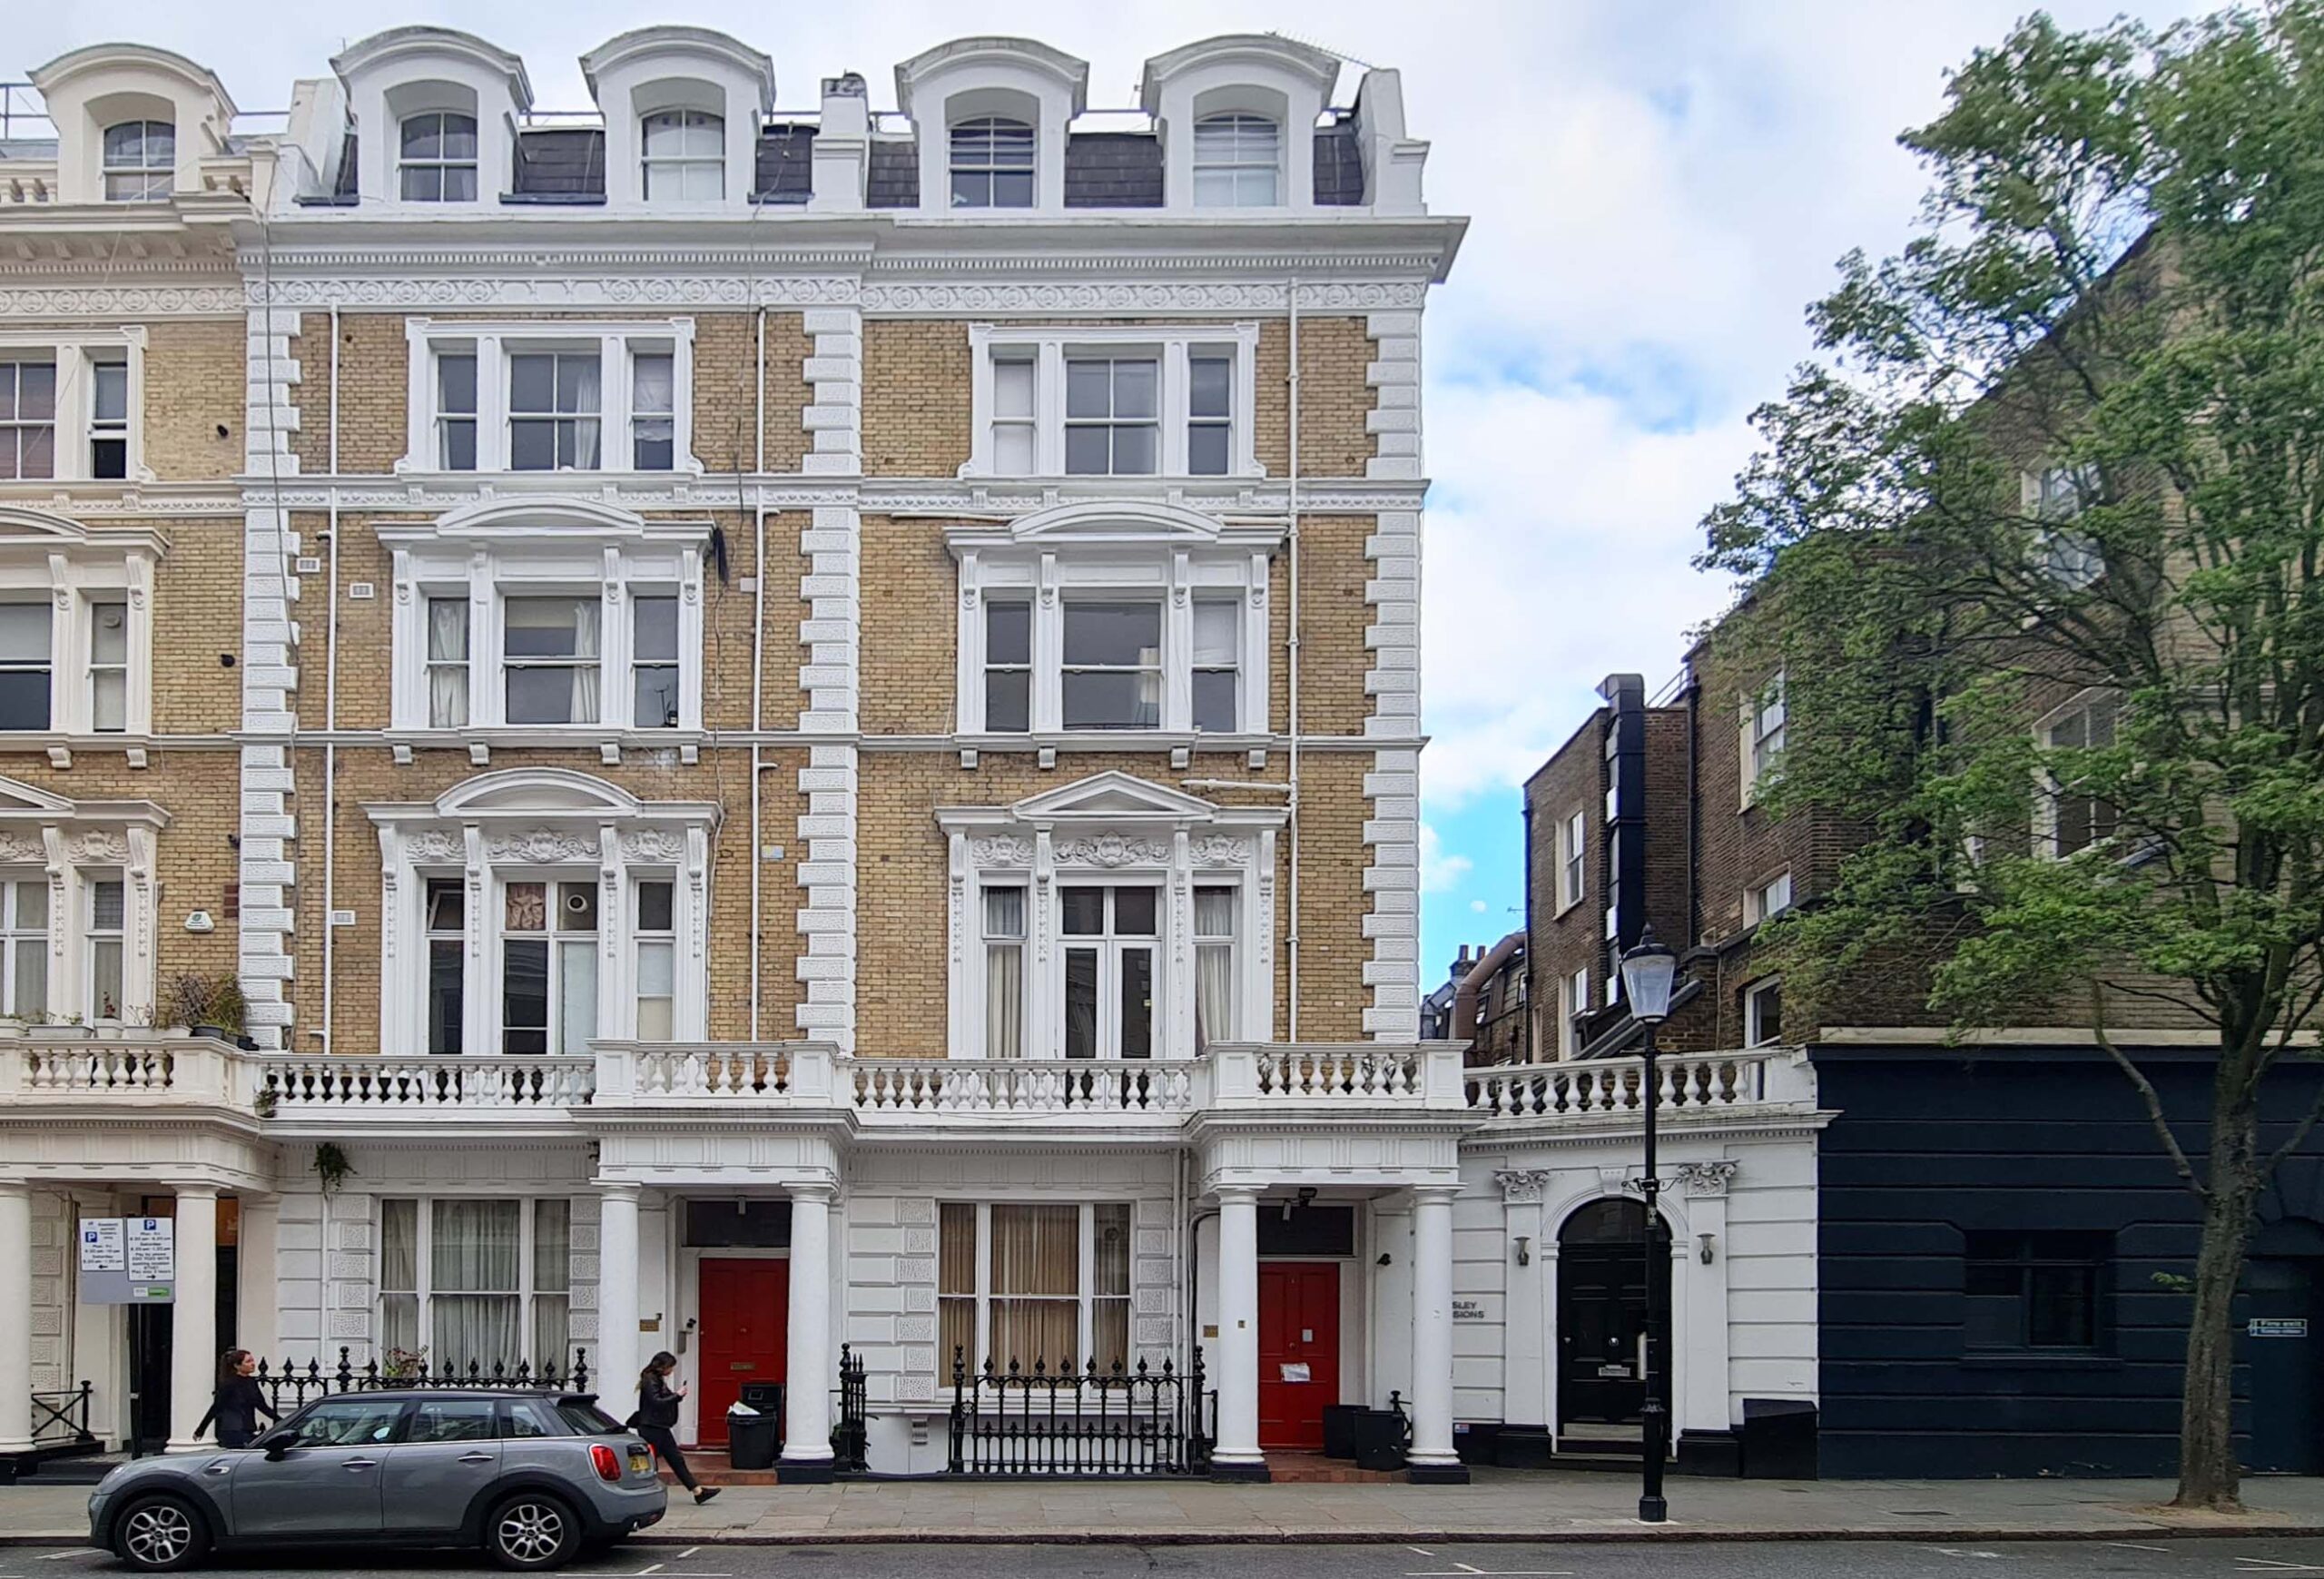 New Notting Hill acquisitions set to bring 23 luxury apartments to prime location rental market